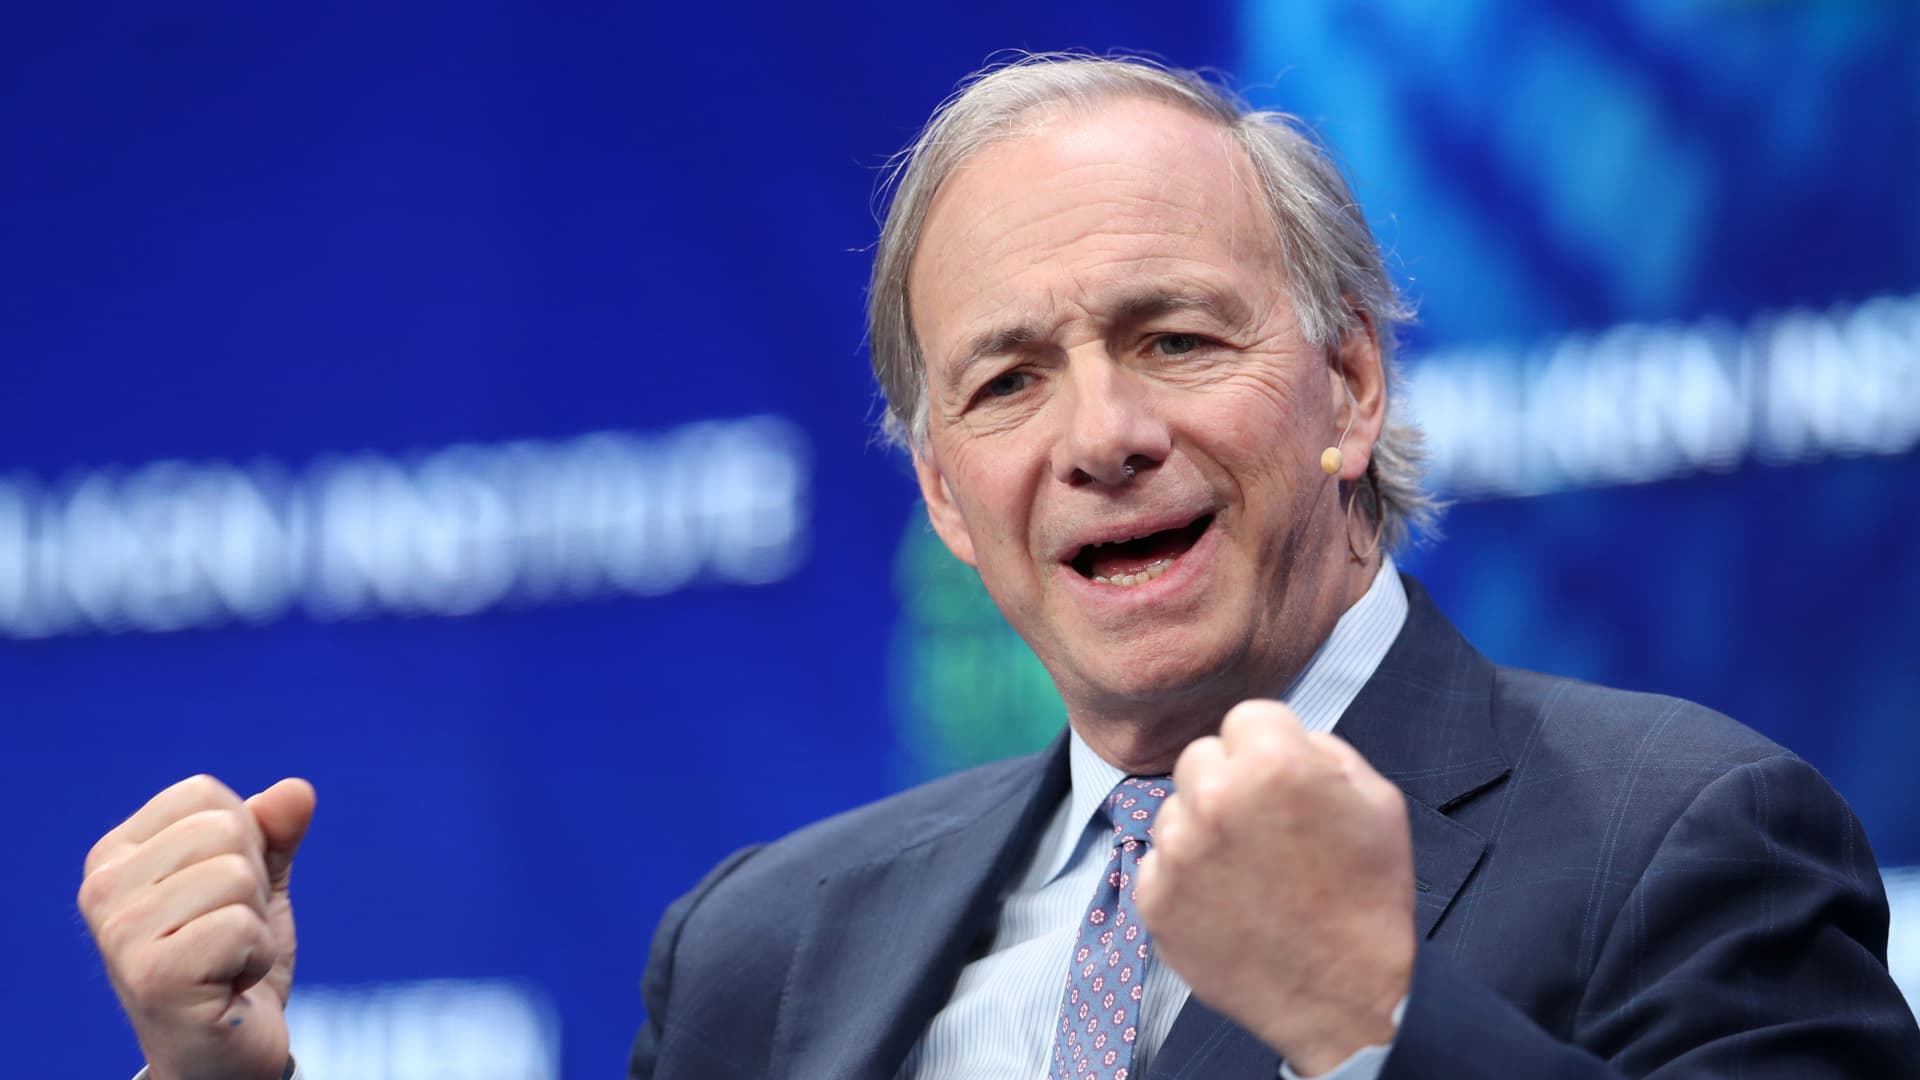 Ray Dalio says the world is in a 'great sag' and echoes the 1930s